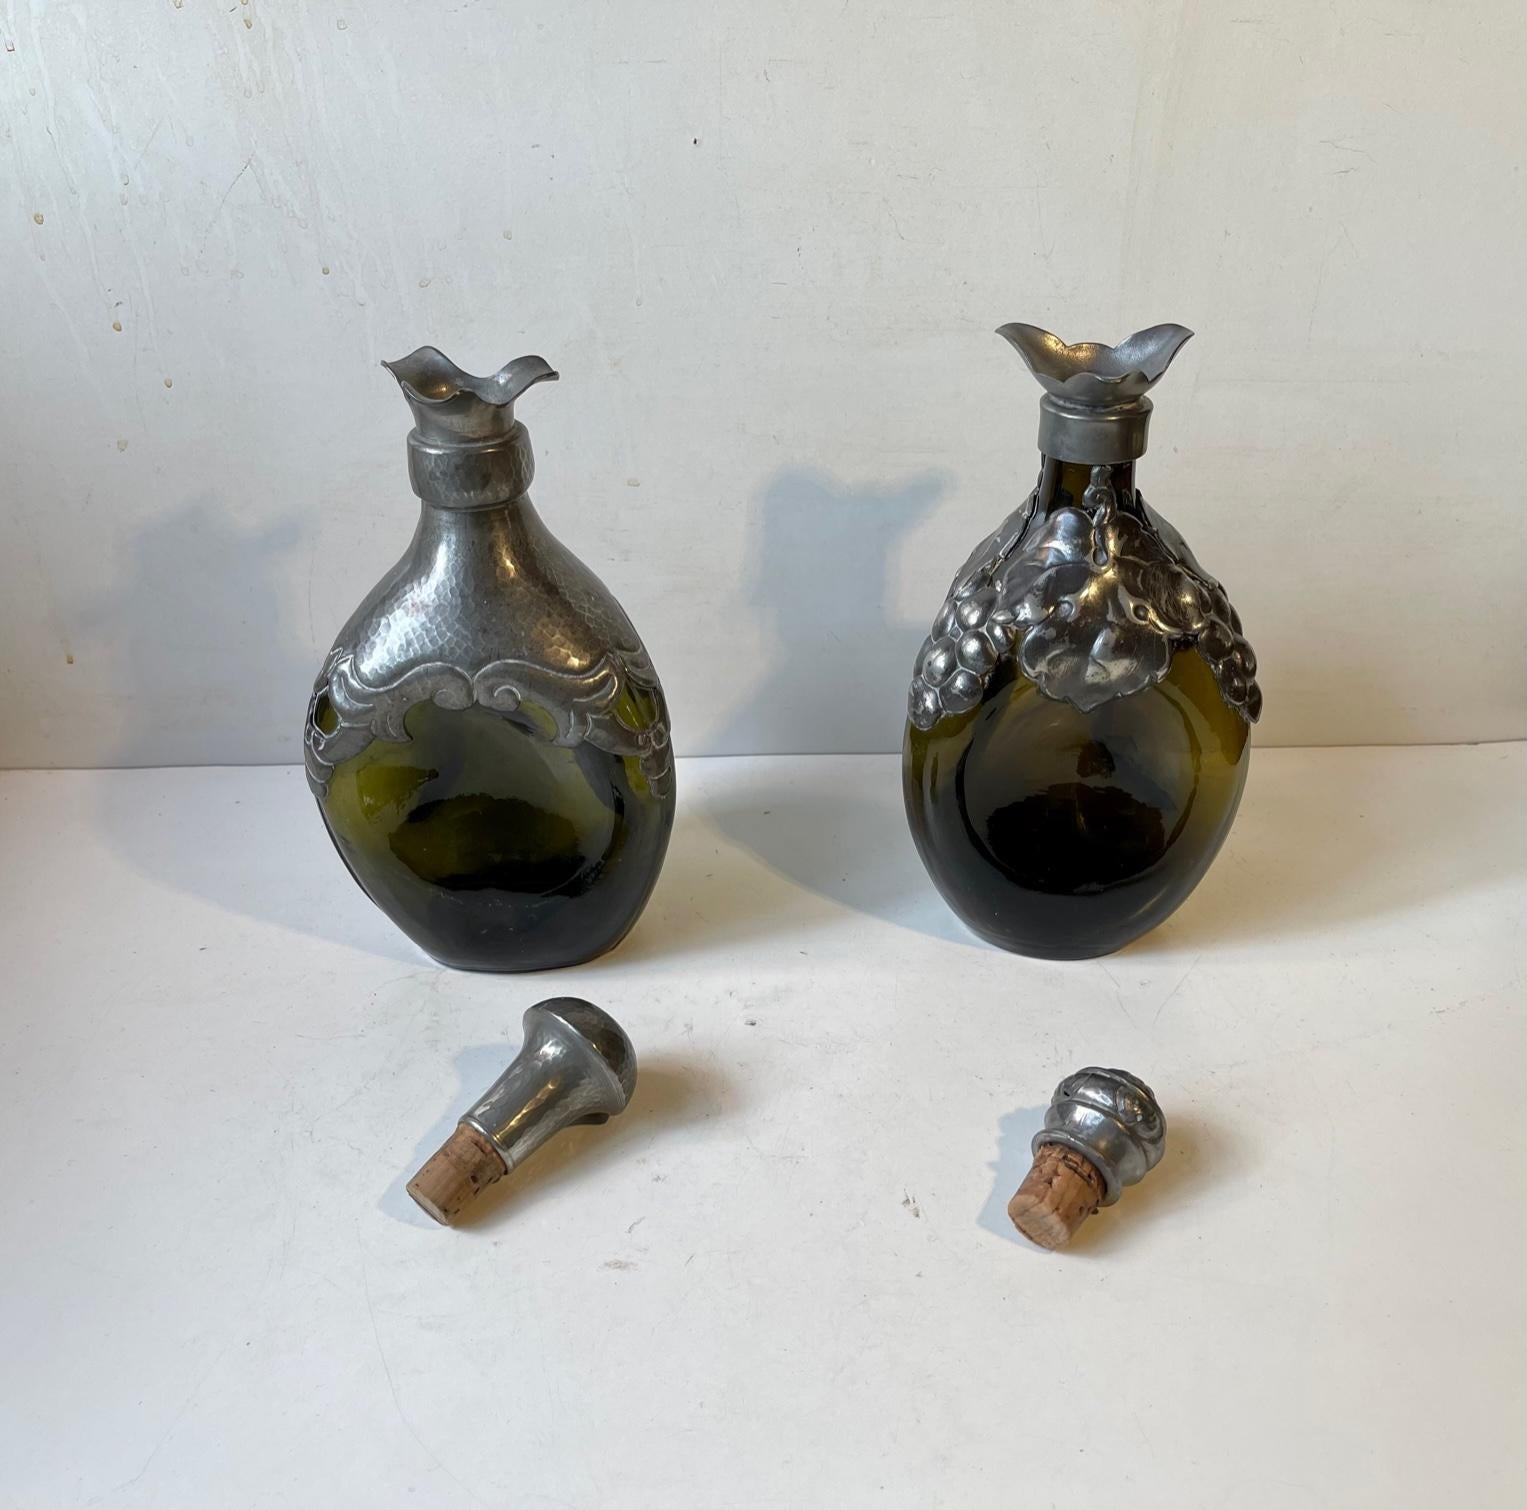 Antique Danish Art Nouveau Decanters in Green Glass and Pewter, 1910s For Sale 2